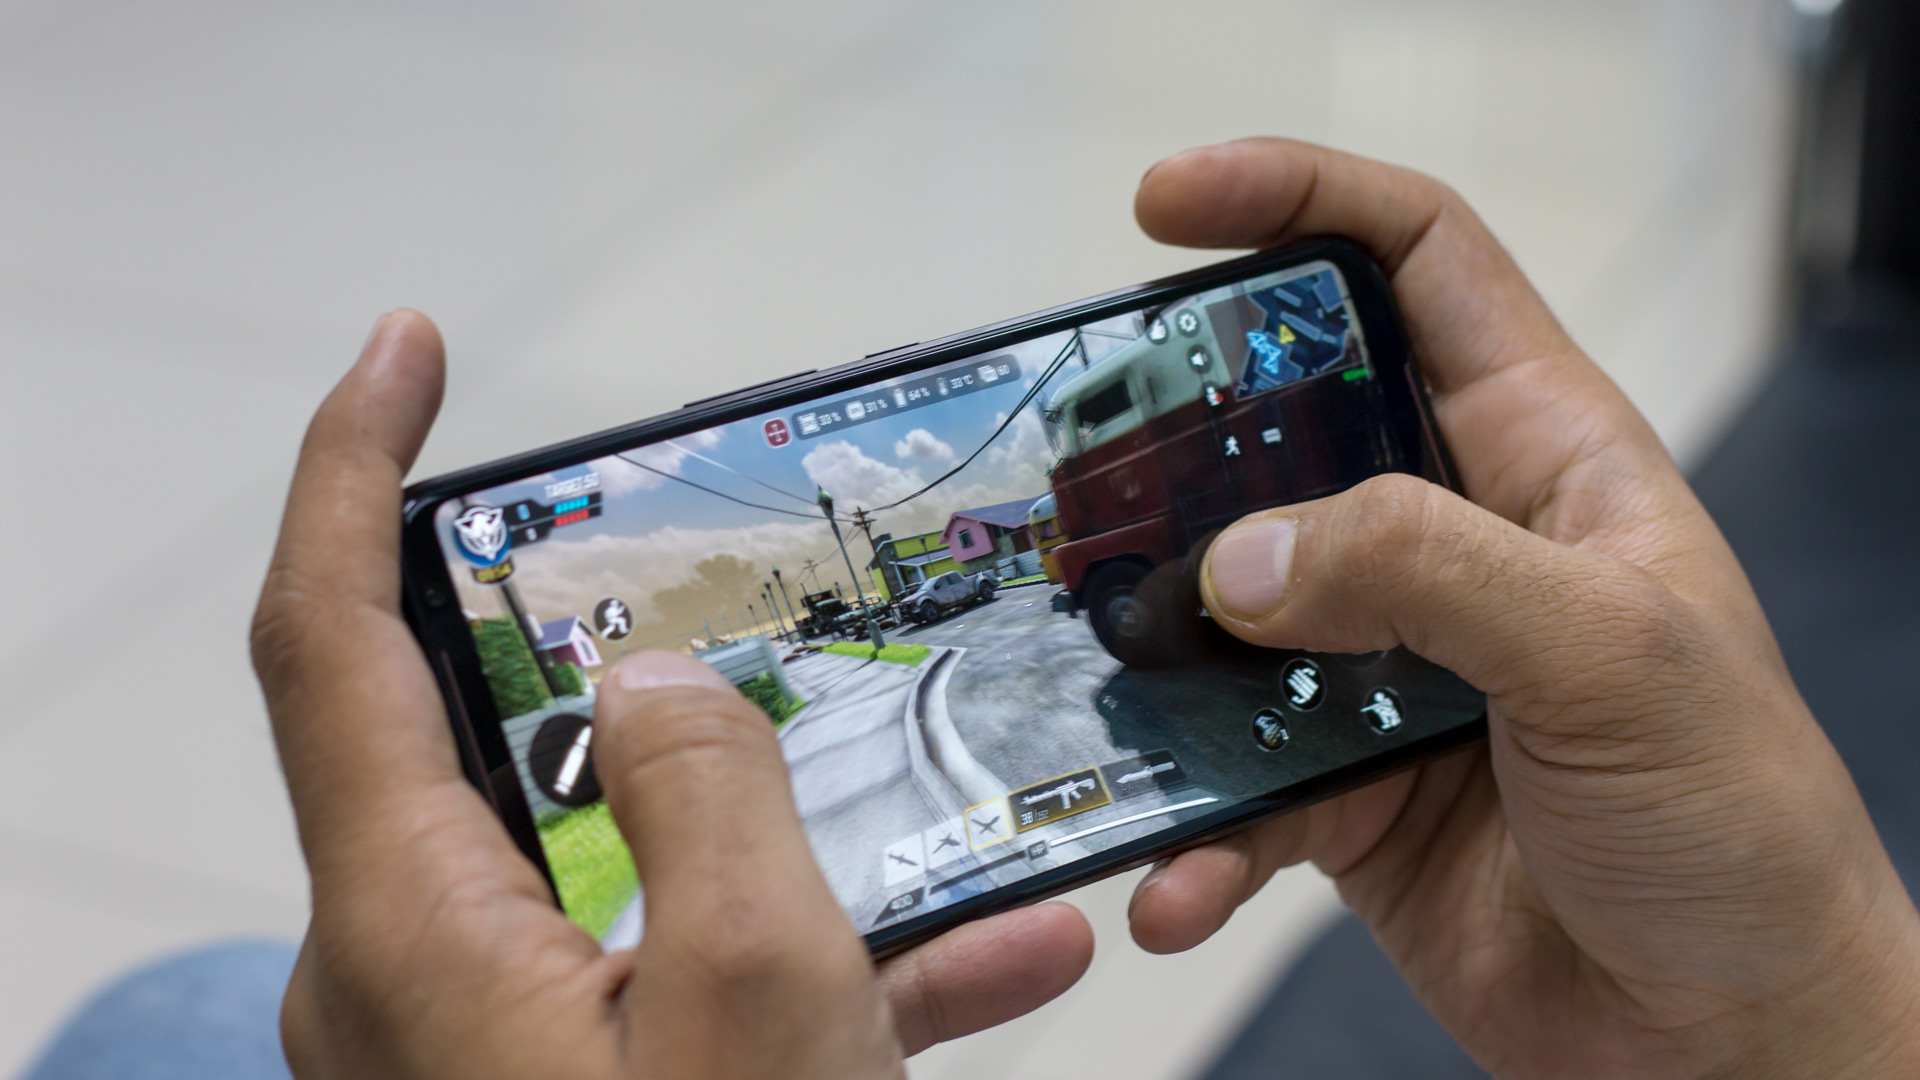 5 best online games like Free Fire and BGMI to play on Android devices